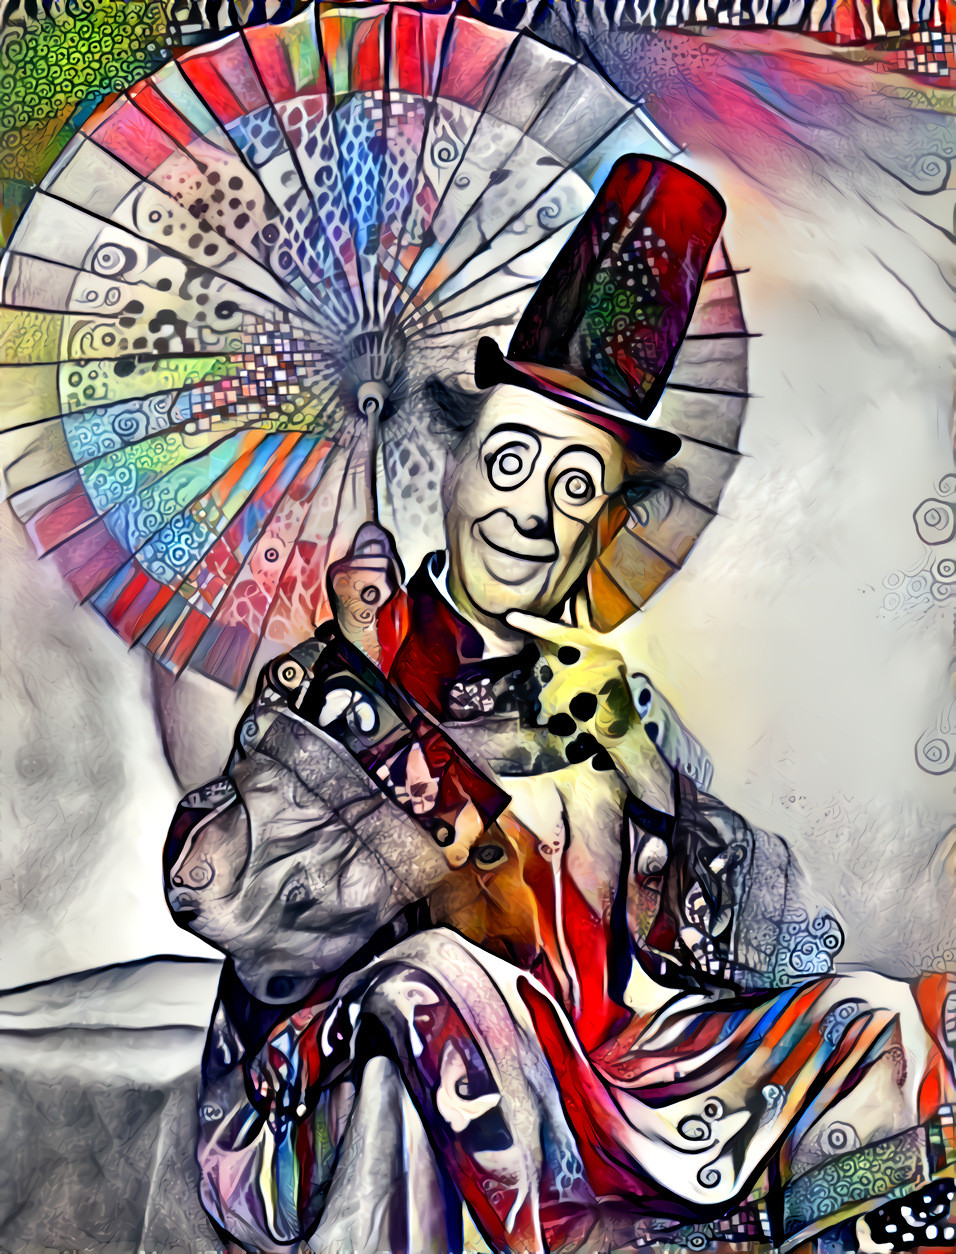 “In the gardens of memory, in the palace of dreams, that is where you and I shall meet” ― the mad hatter (Picture is of Ed Wynn, was an American actor provided the voice of the Mad Hatter in Walt Disney's Alice in Wonderland.